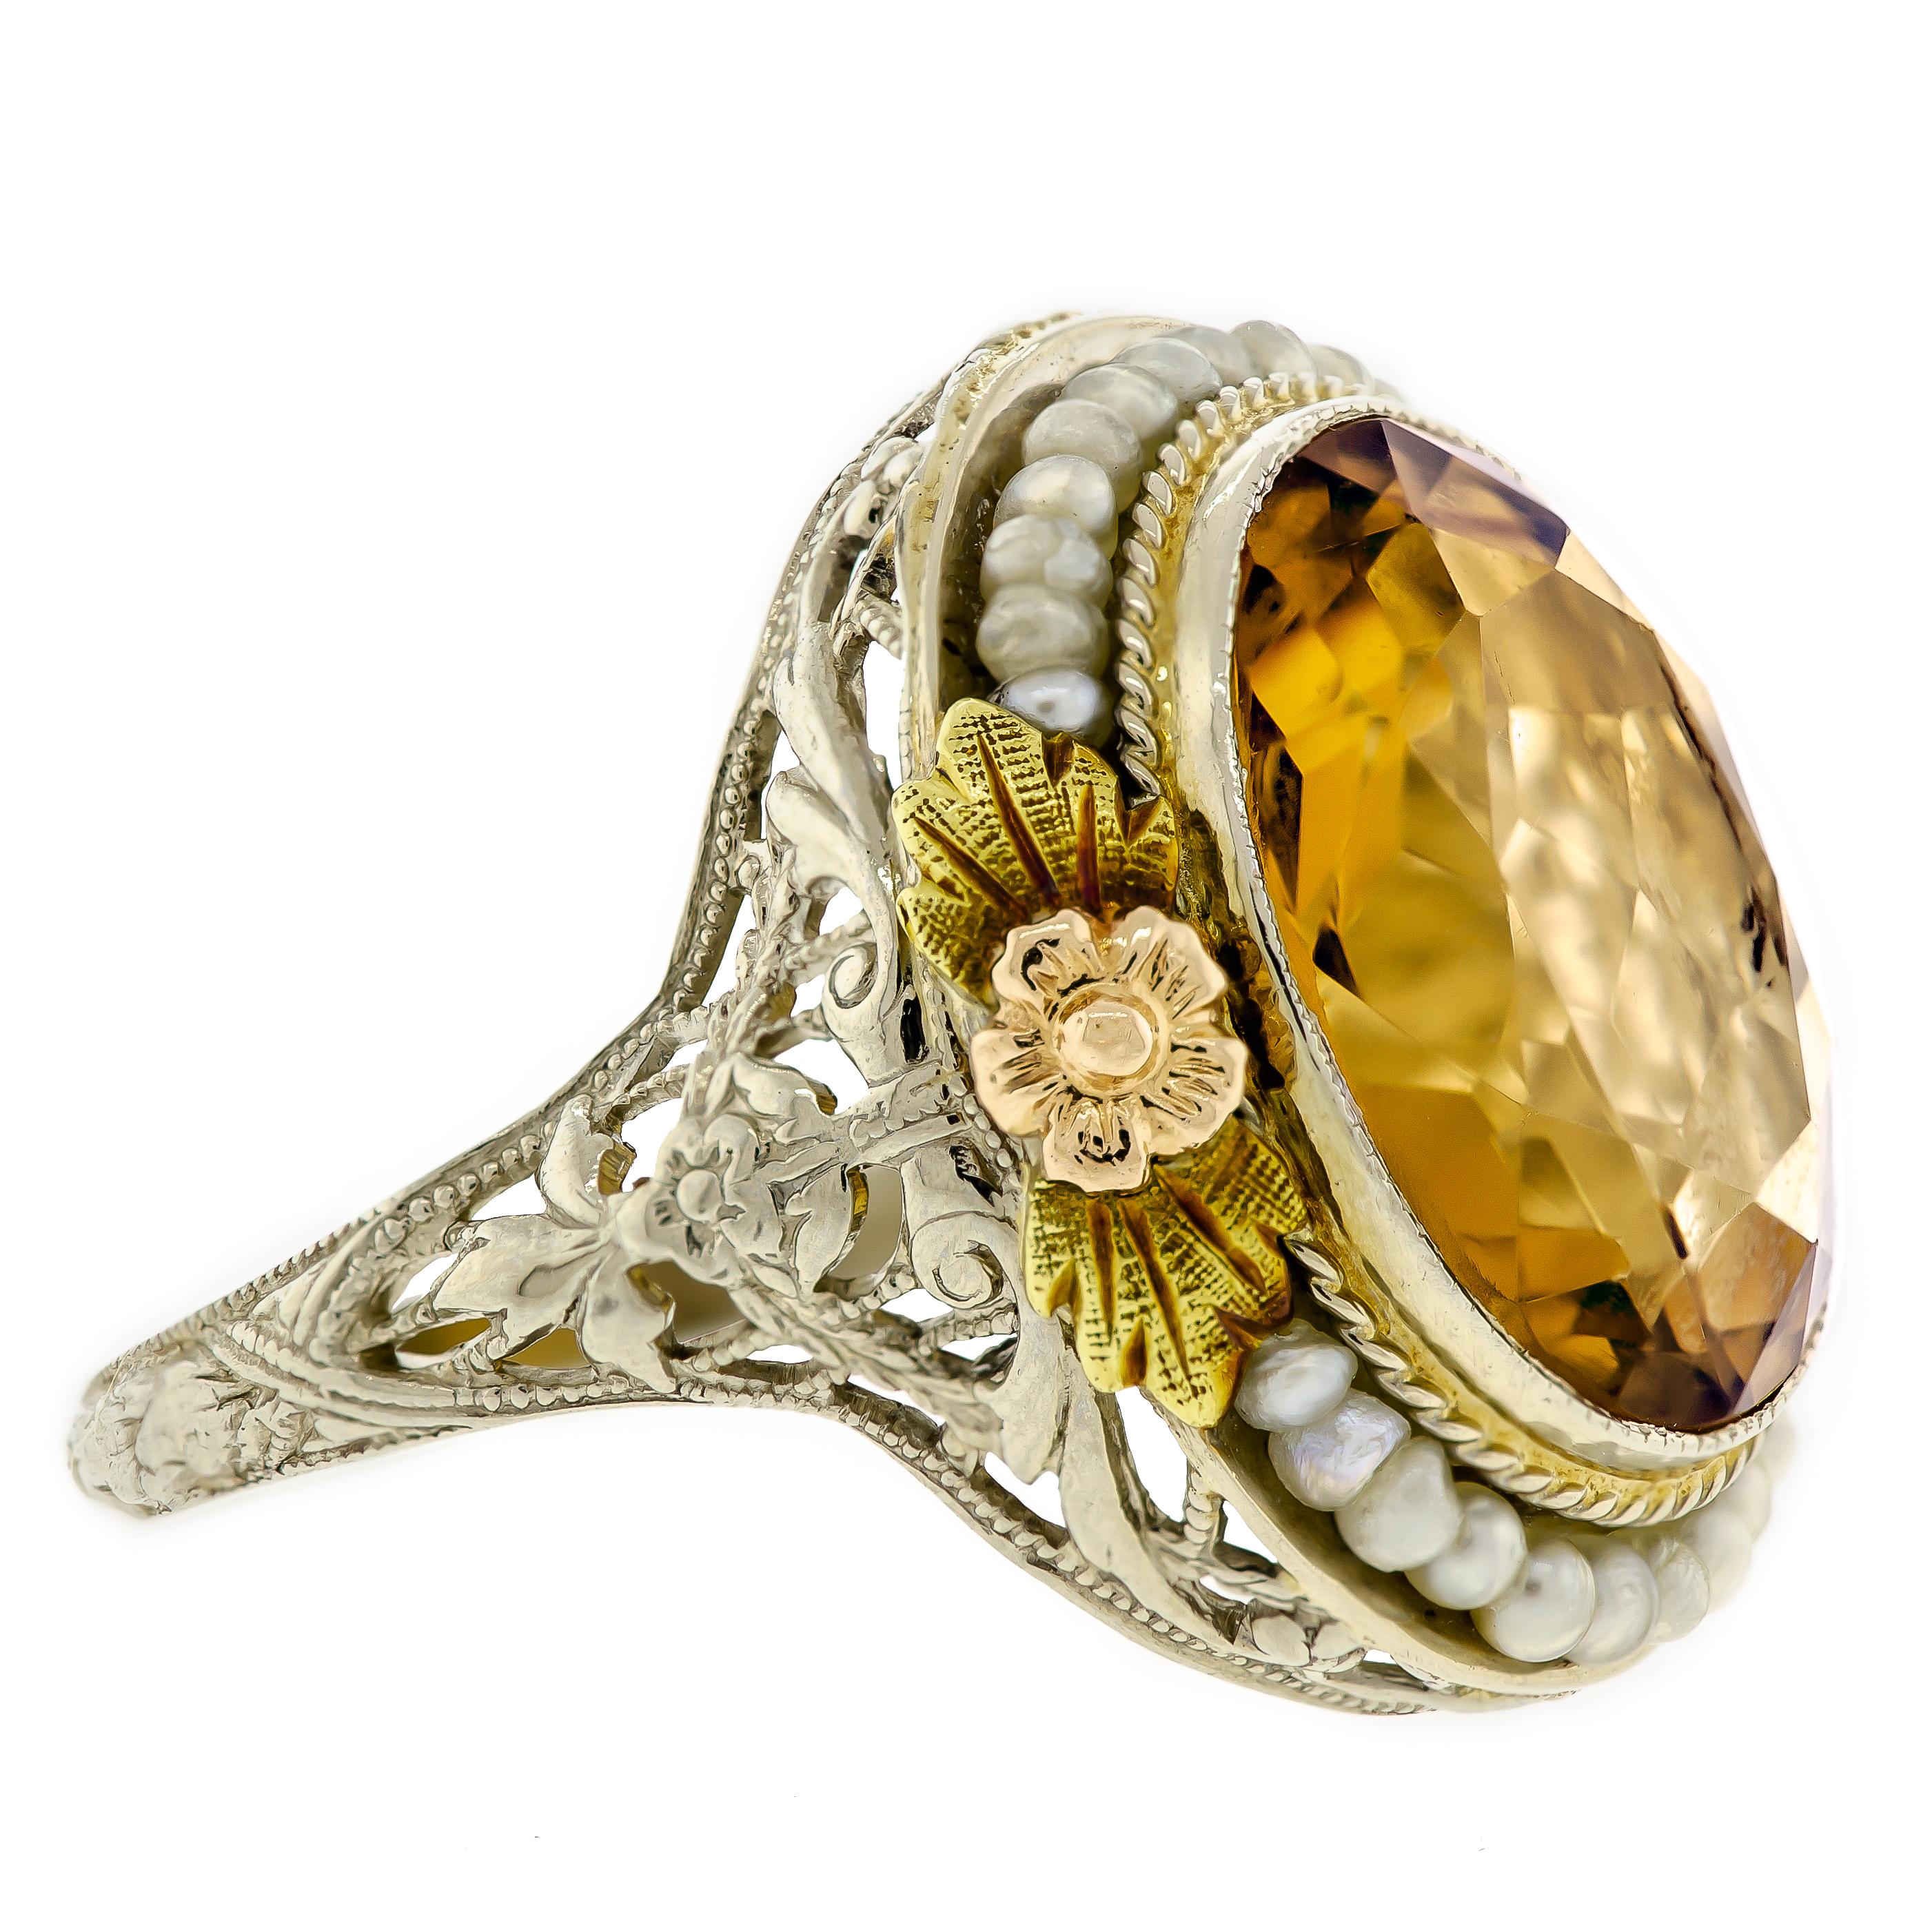 Lovely Art Deco citrine seed pearl and 14 karat white and yellow gold filigree ring centrally set with one oval brilliant cut citrine surrounded by seed pearls frame held in an elaborate 14k white gold filigree frame with applied 14k yellow gold